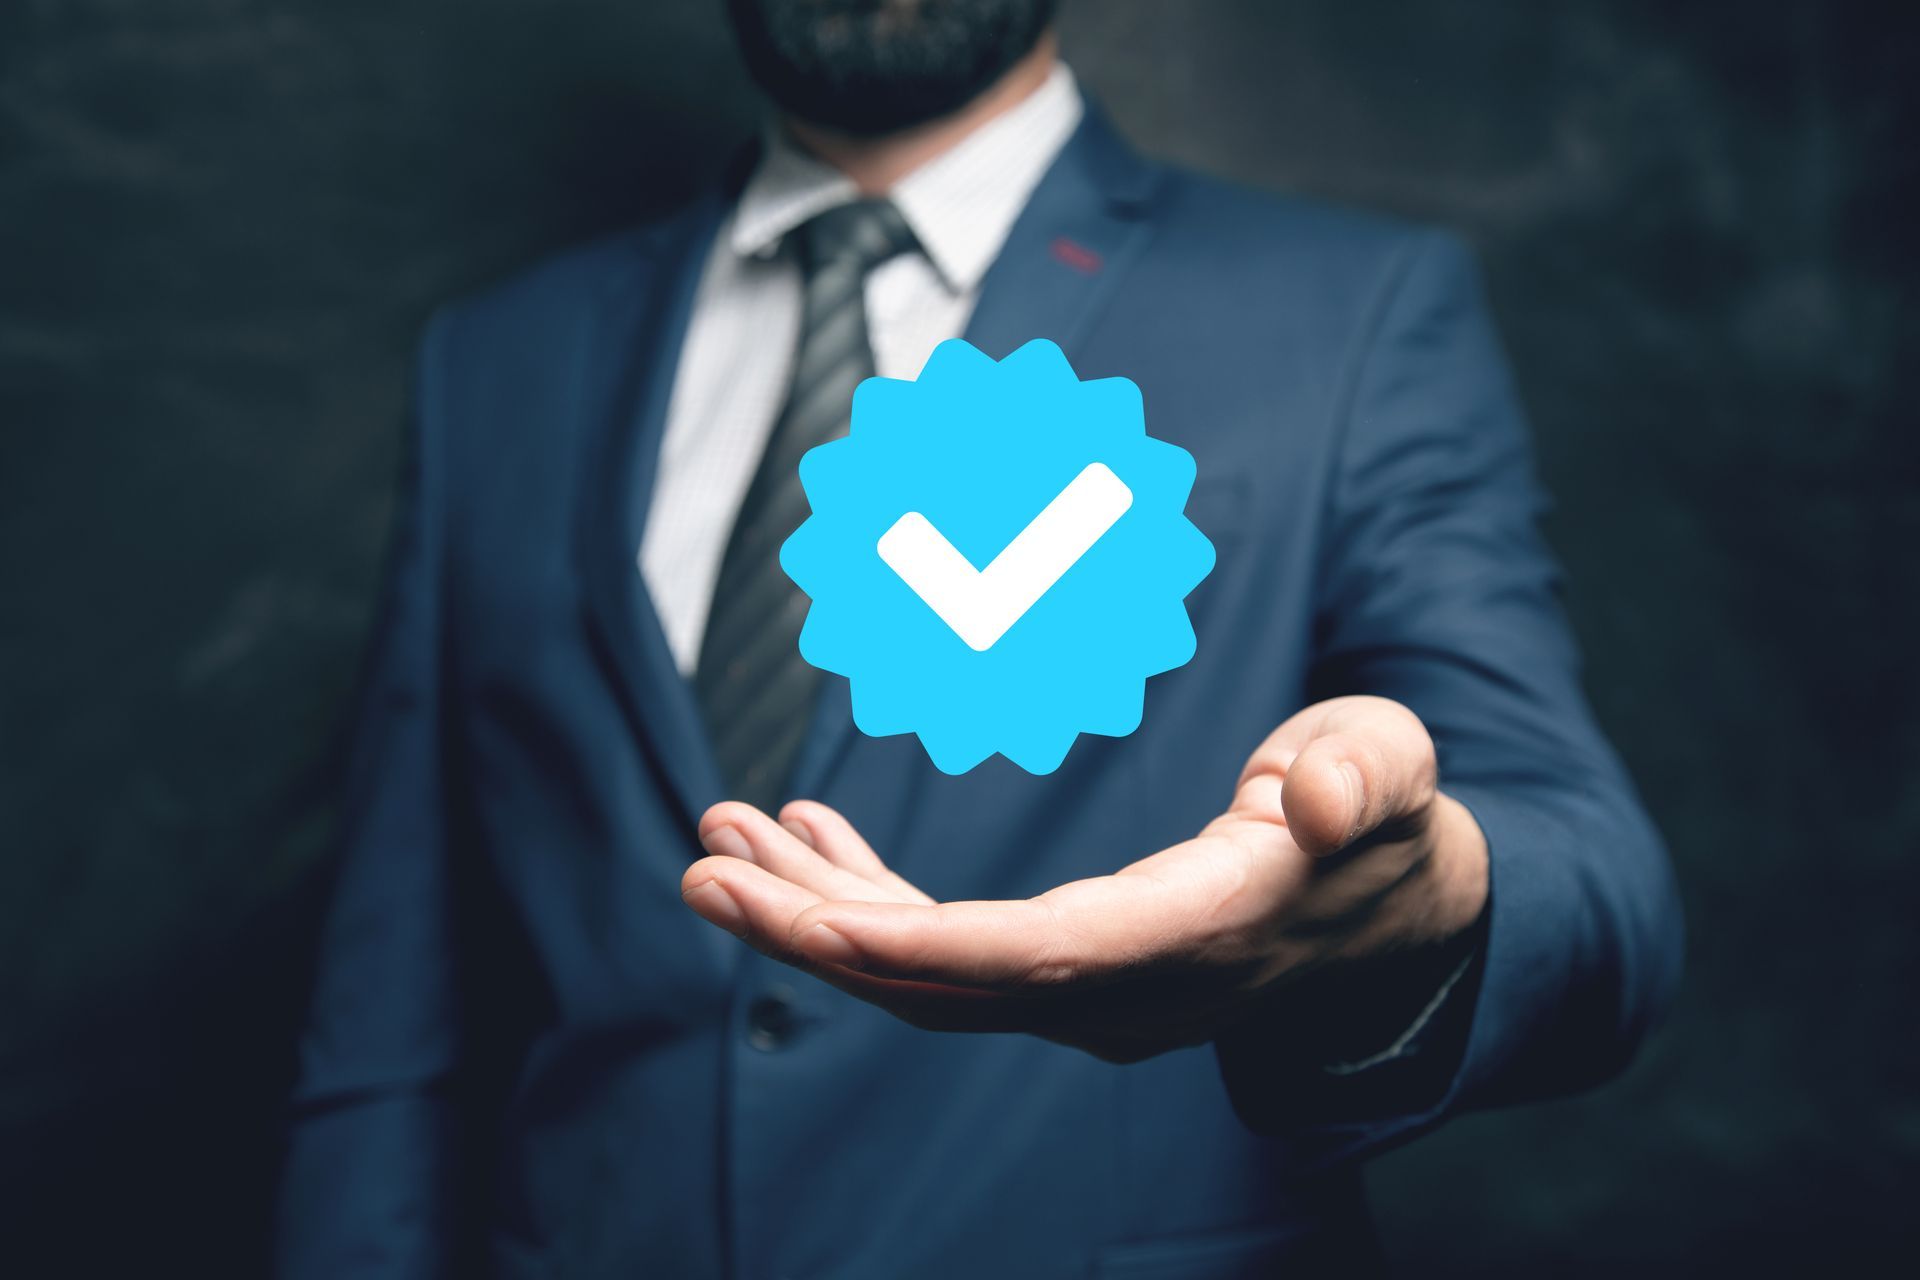 Man in a suit holding a floating blue tick symbol